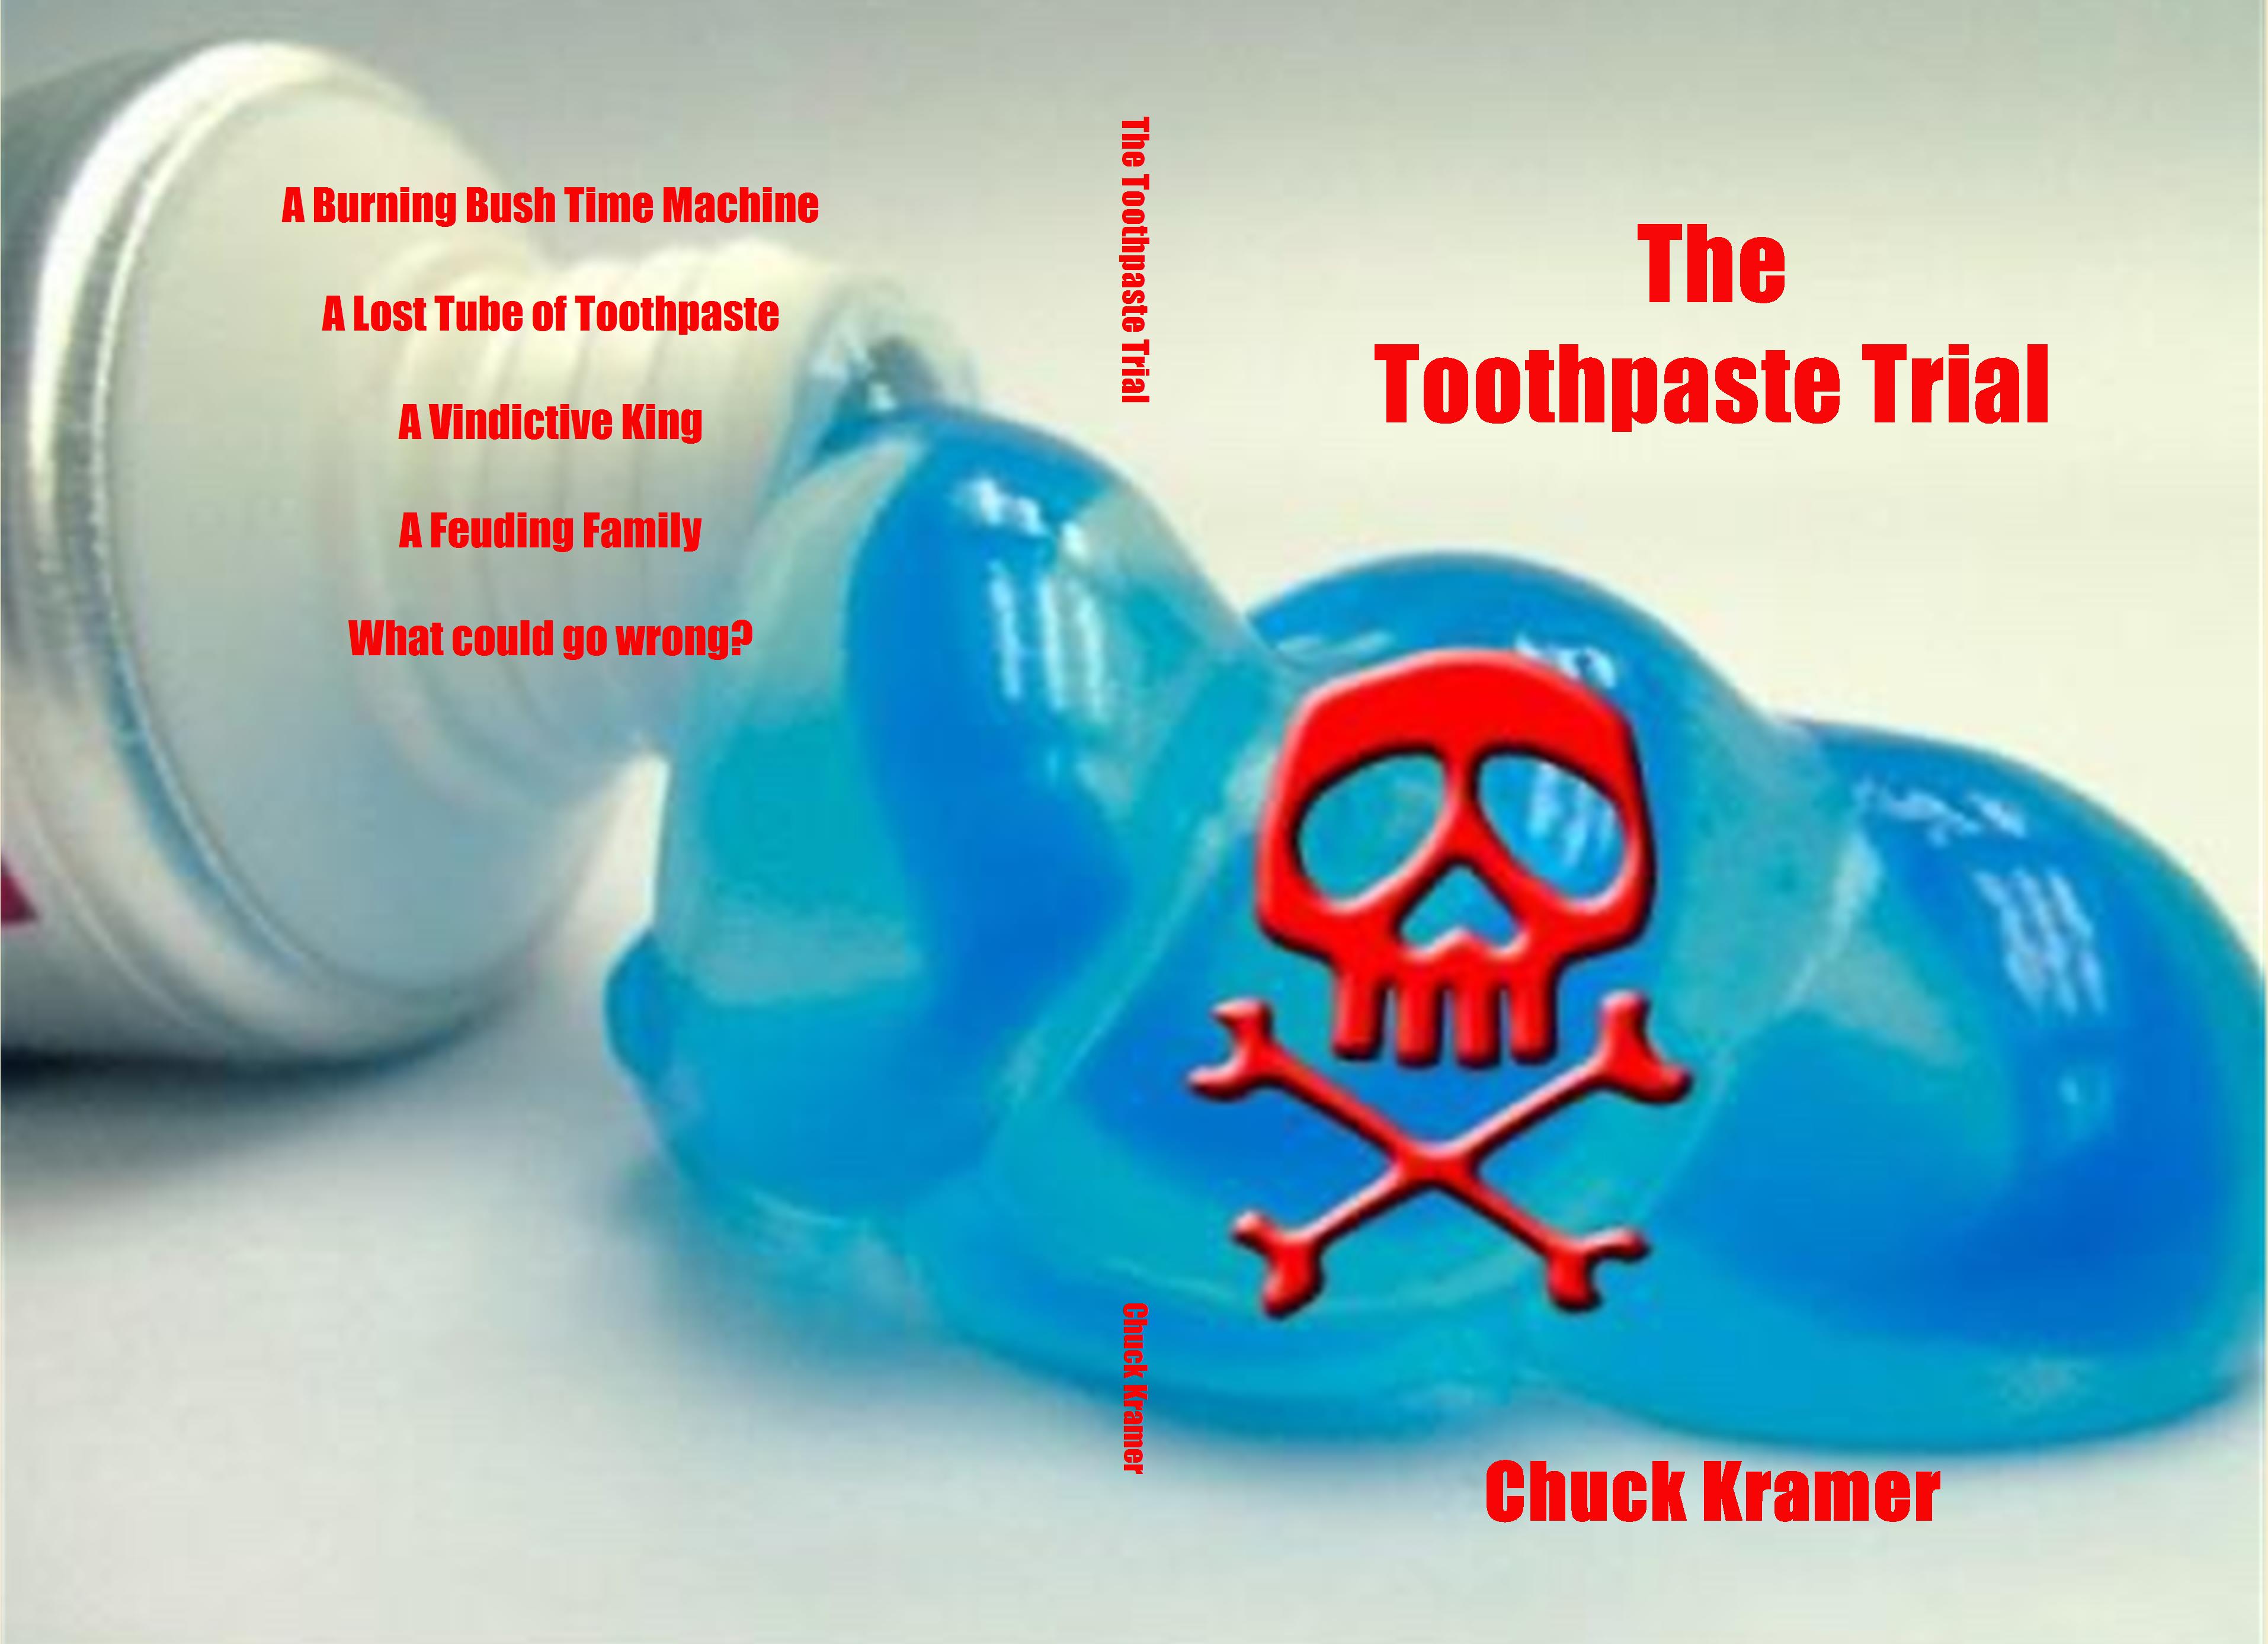 The Toothpaste Trial cover image